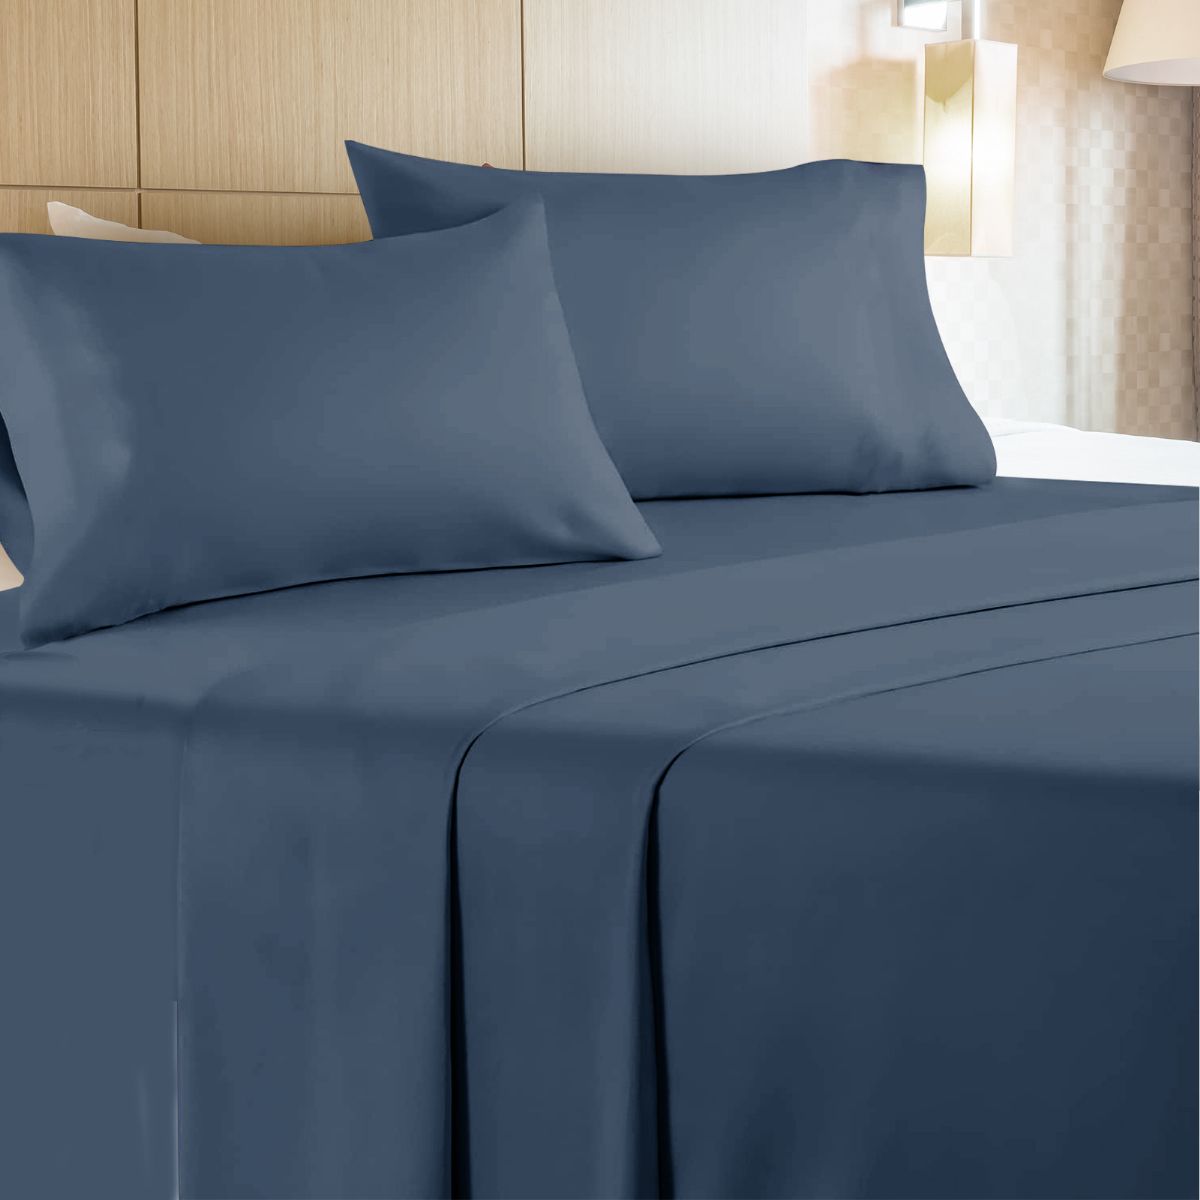 6 Sets of 4 Piece Microfiber Bed Sheet Set Twin Size In Navy